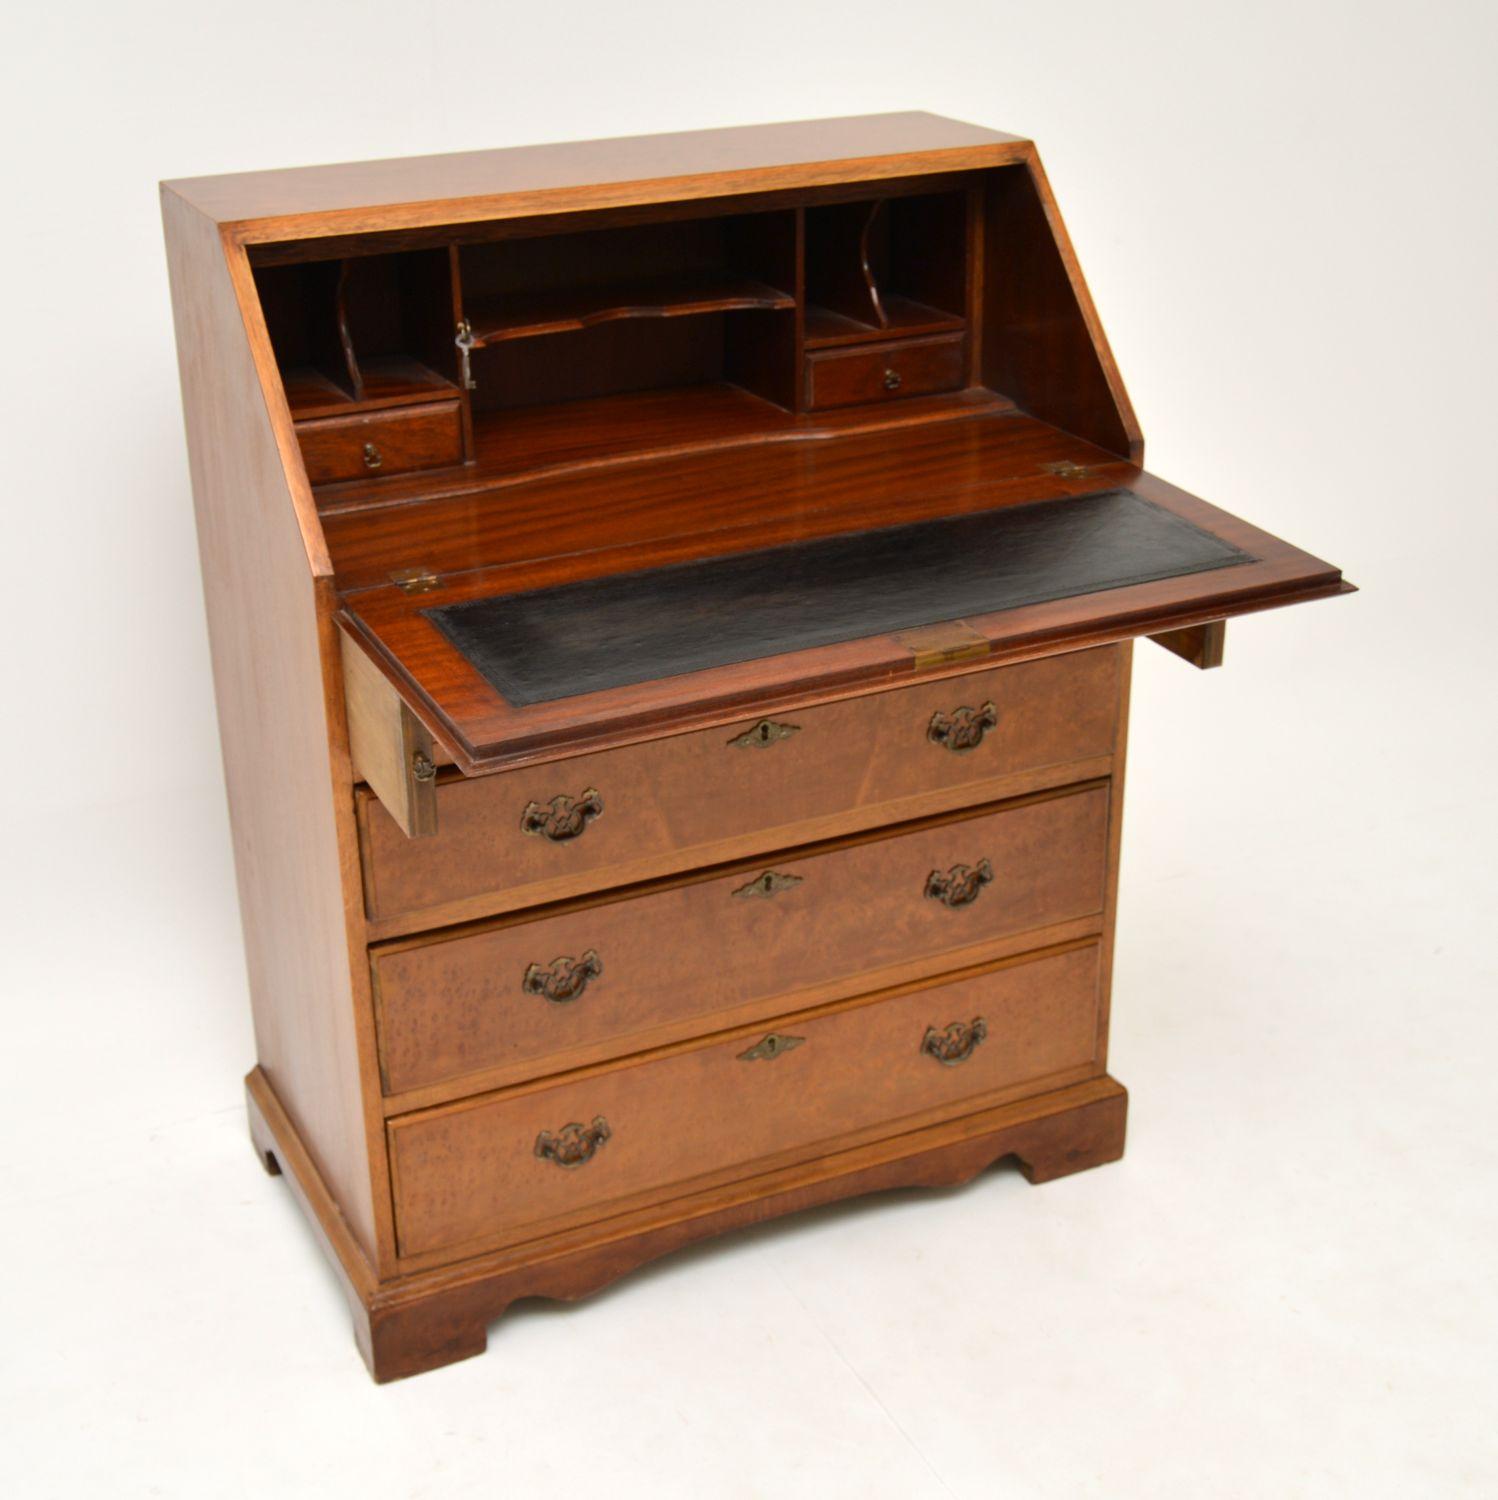 A smart and useful antique writing bureau, beautifully made from walnut. This is in the antique Georgian style, it dates from circa 1930s period.

The quality is excellent, this is of a great size and is a really useful piece. There is a generous